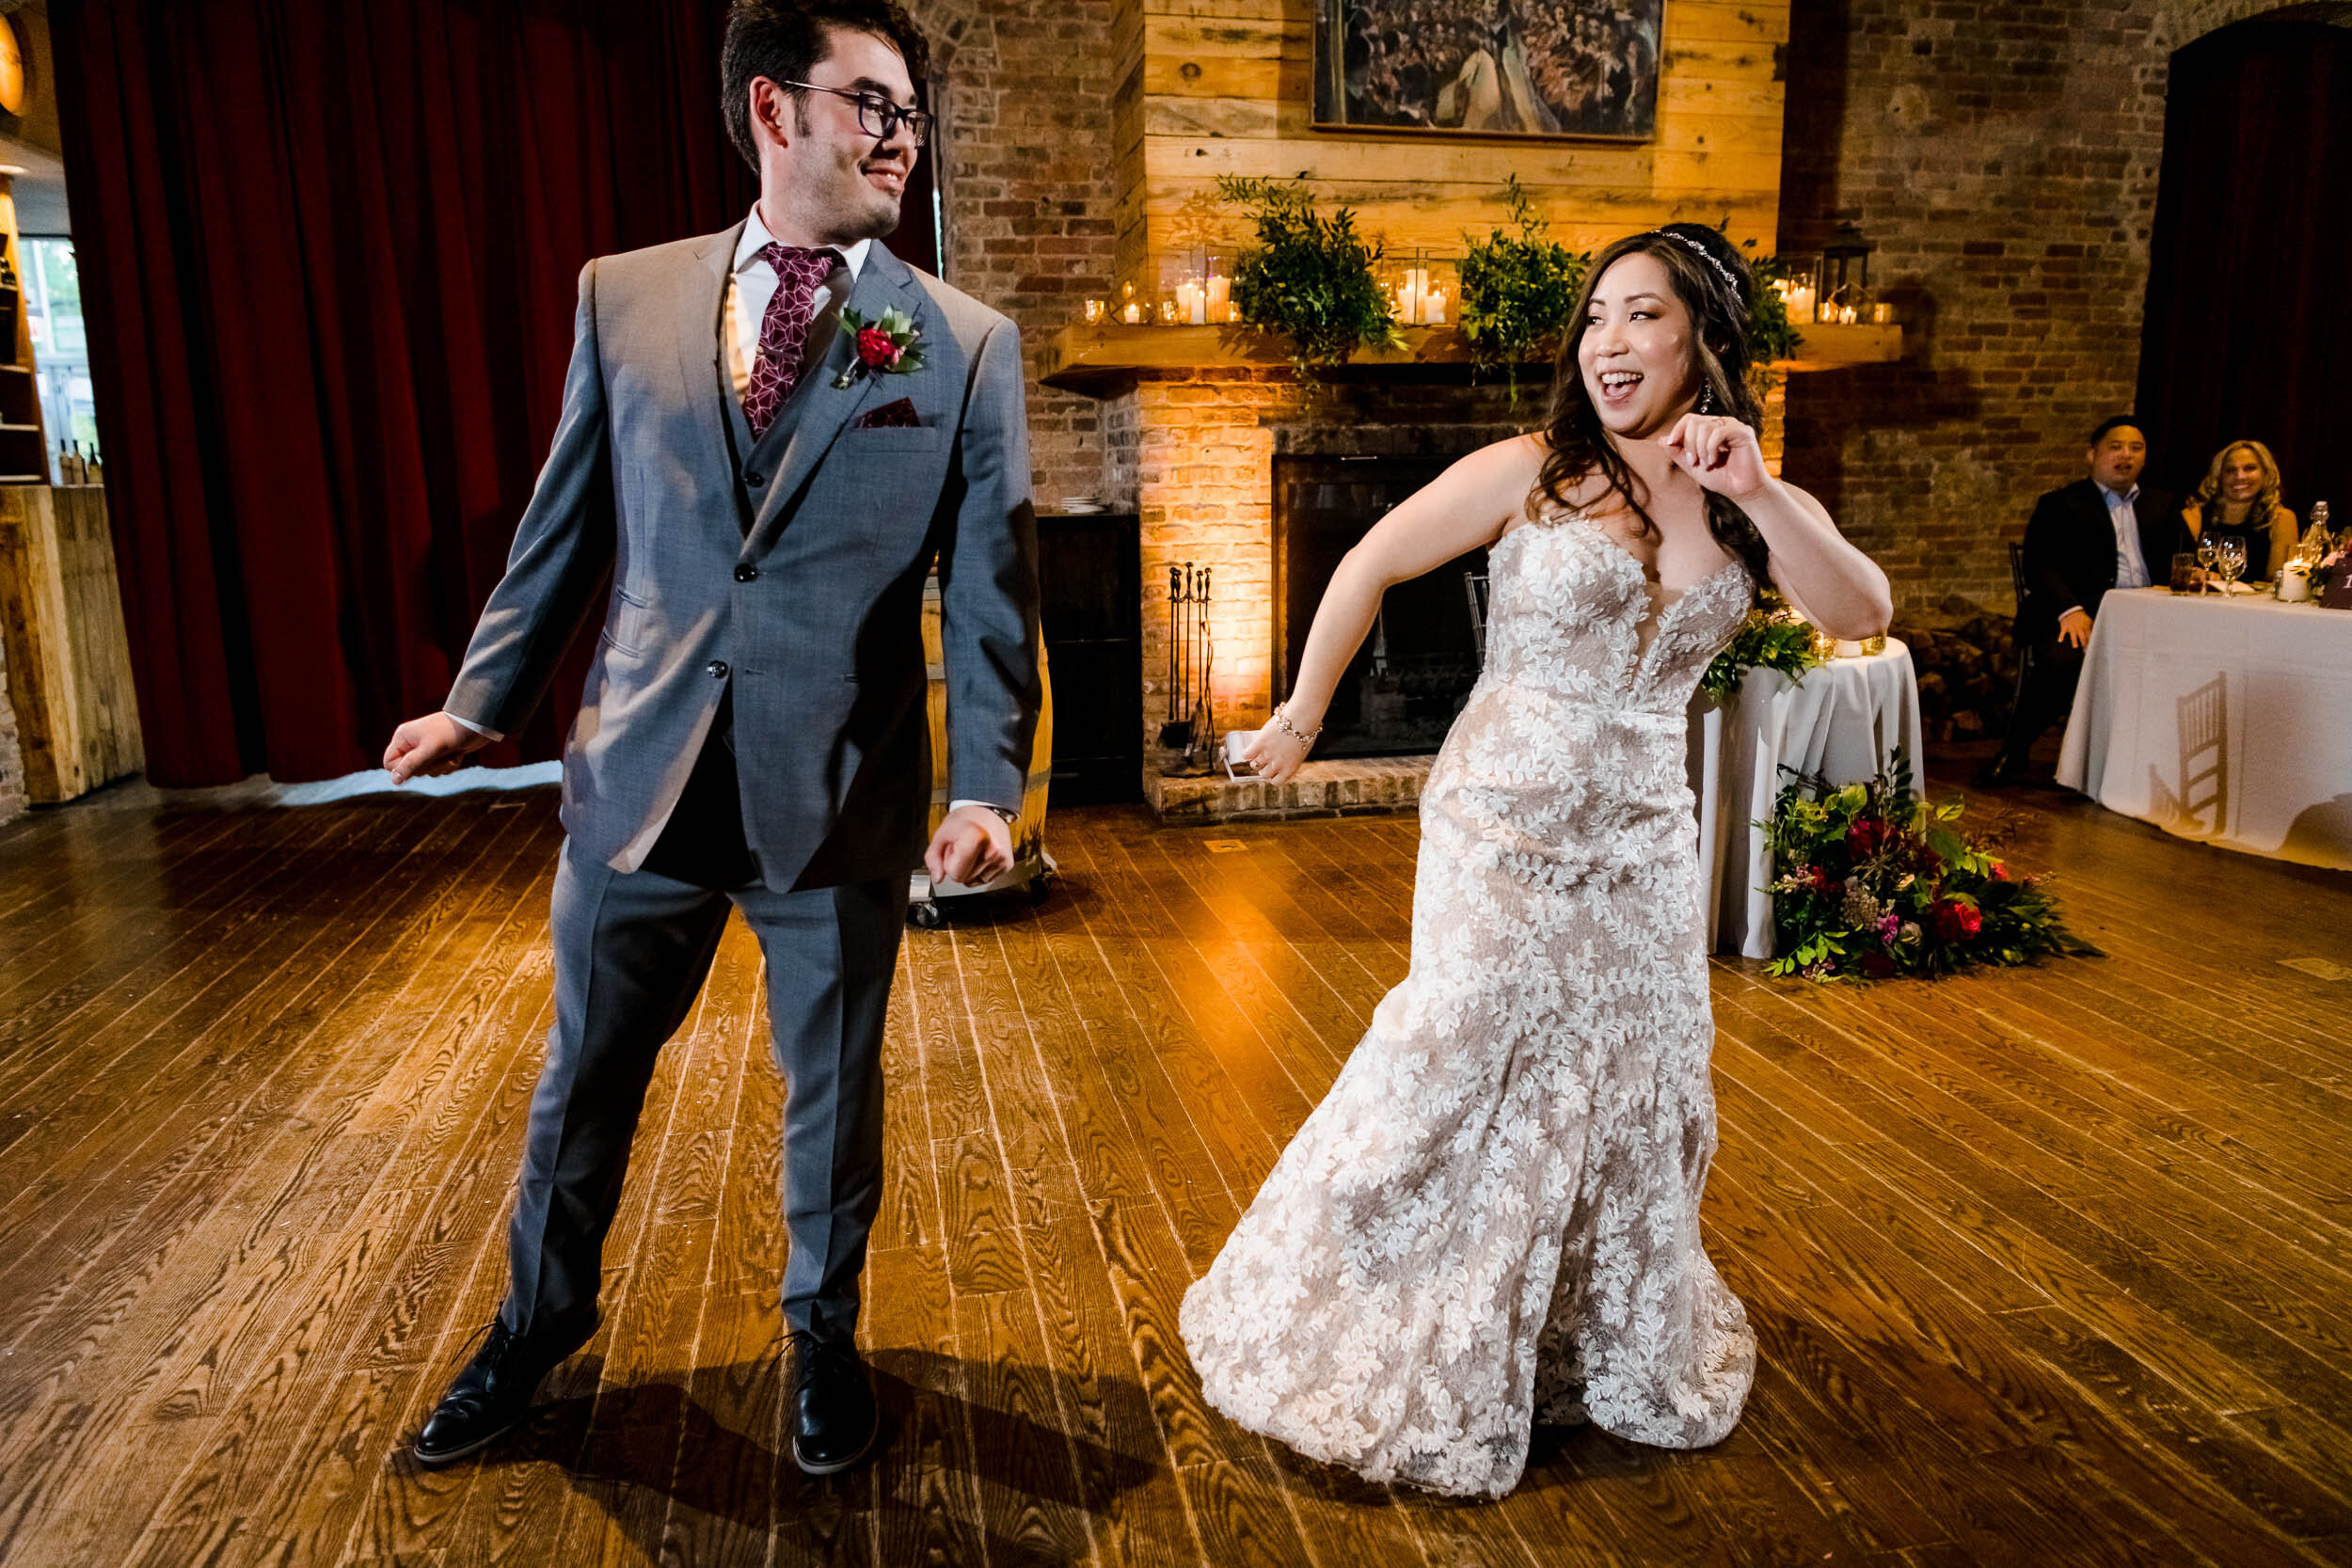 Chicago Wedding Photographer | City Winery | J. Brown Photography | couple's first dance.